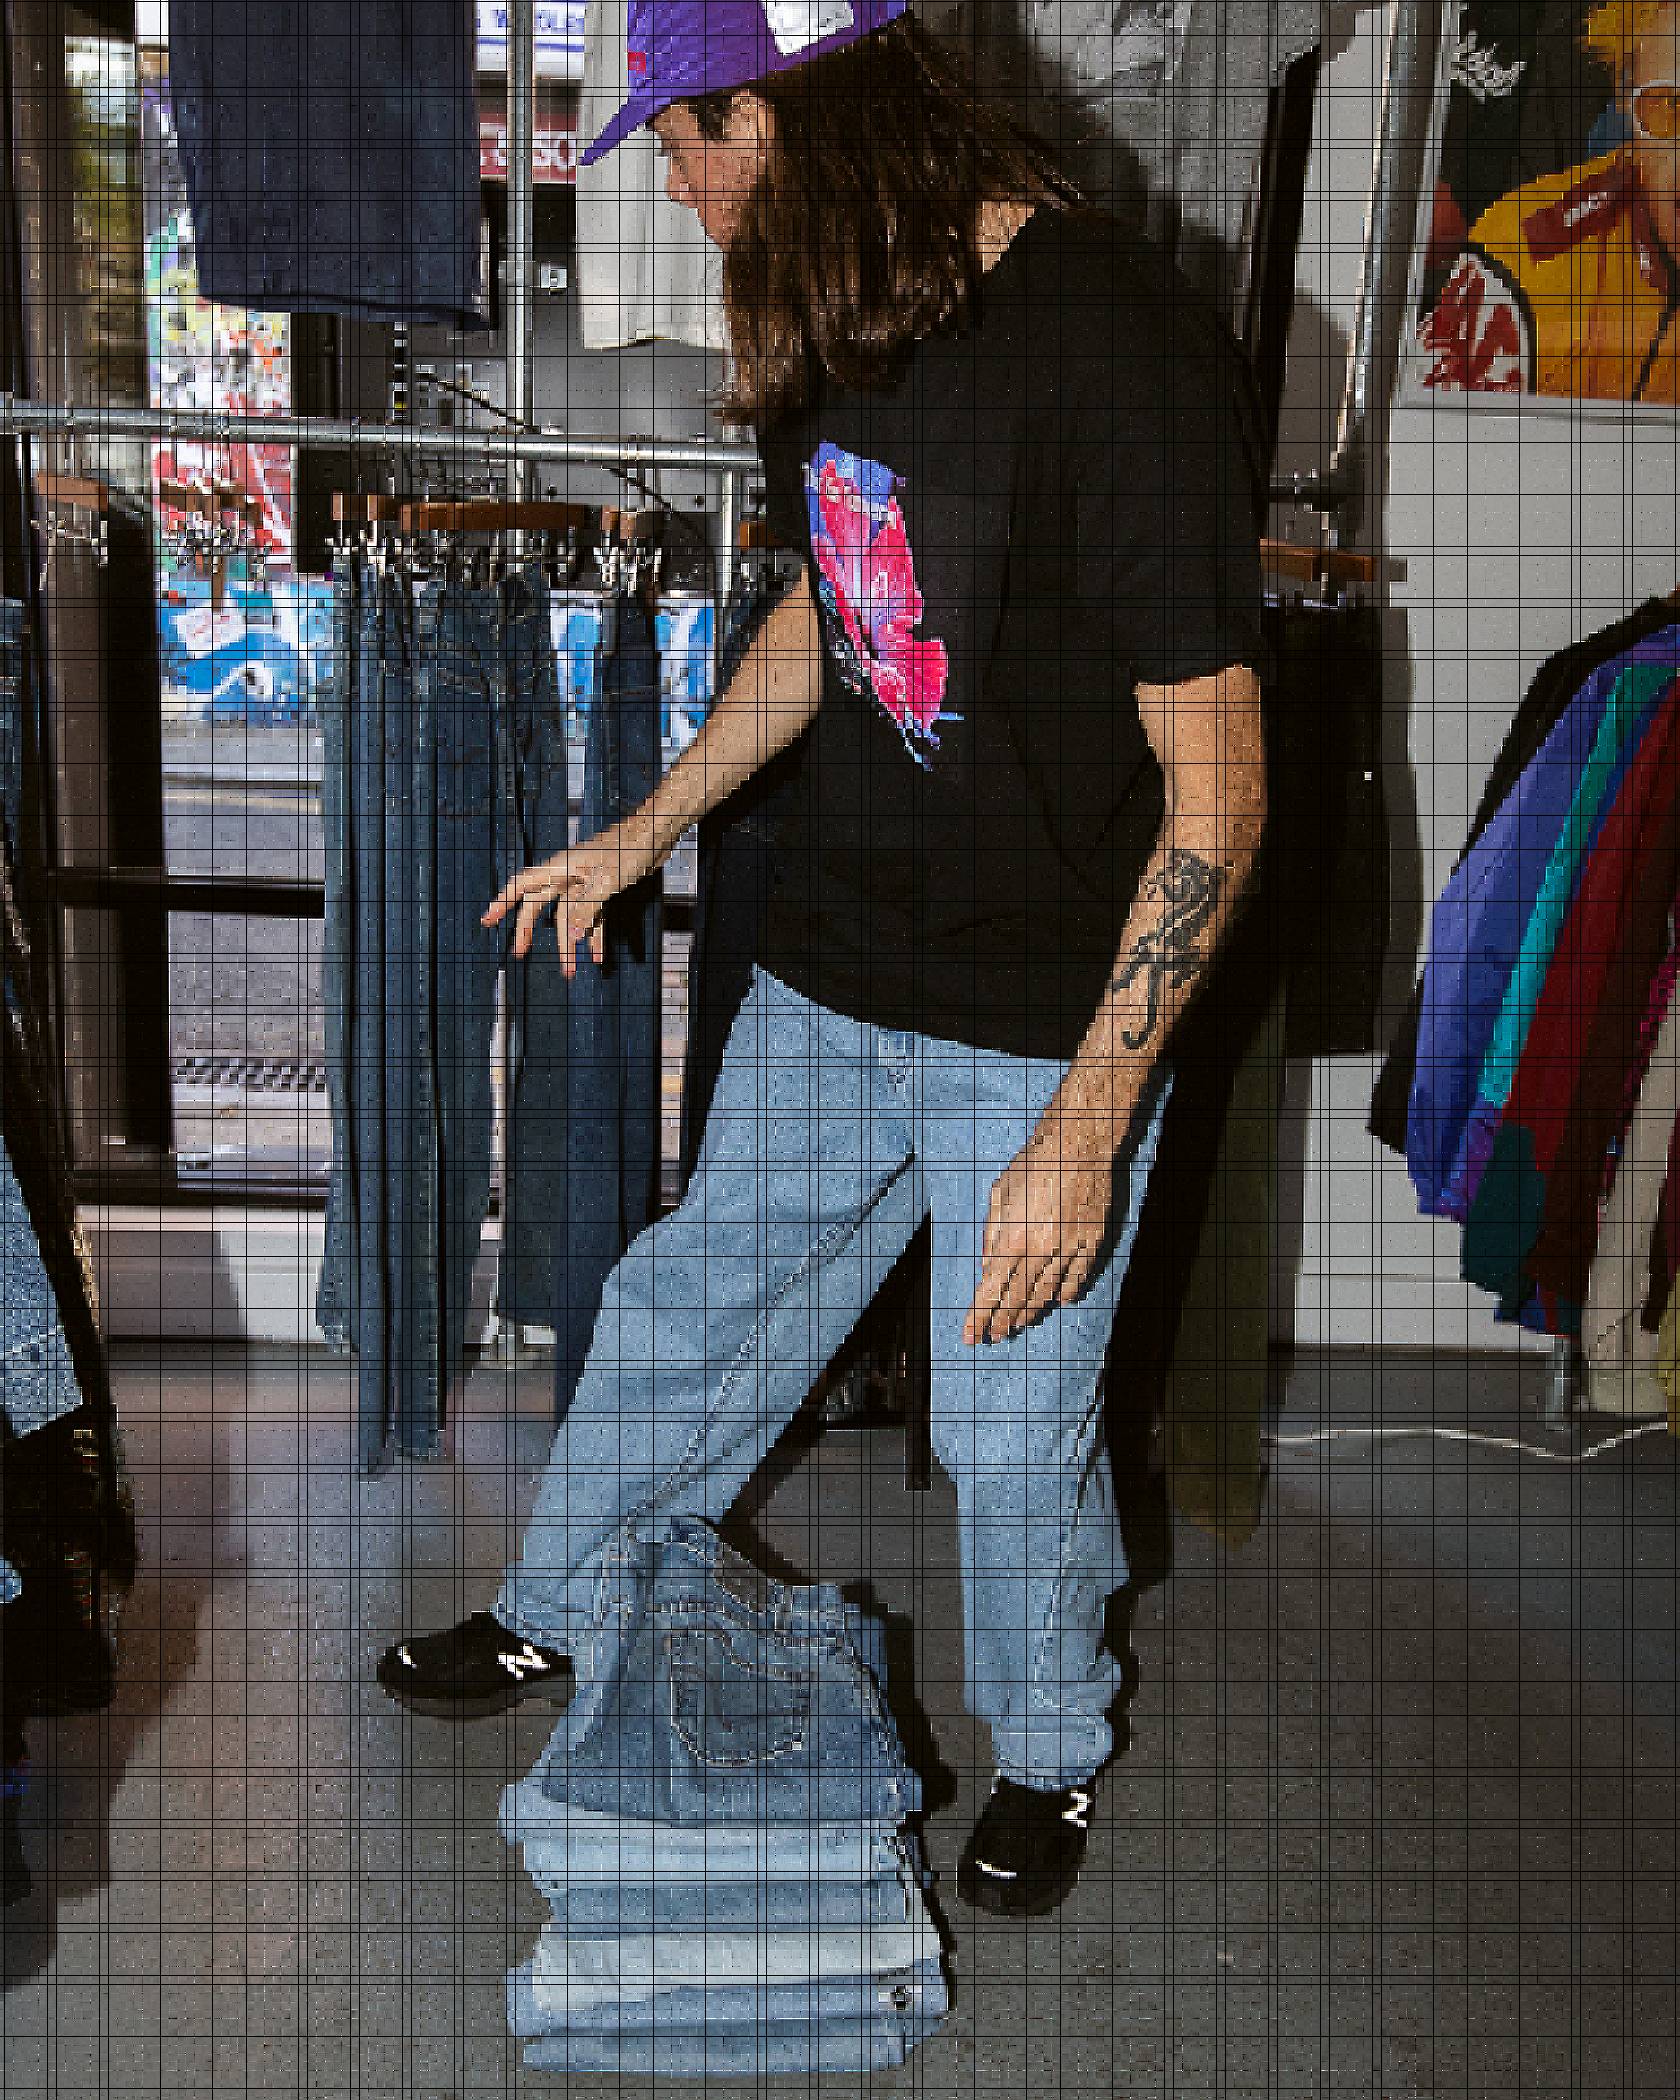 Photo of Sam Trotman inside a vintage clothing store, looking at a rack of blue jeans. There is another stack of folded jeans on the floor in front of him.